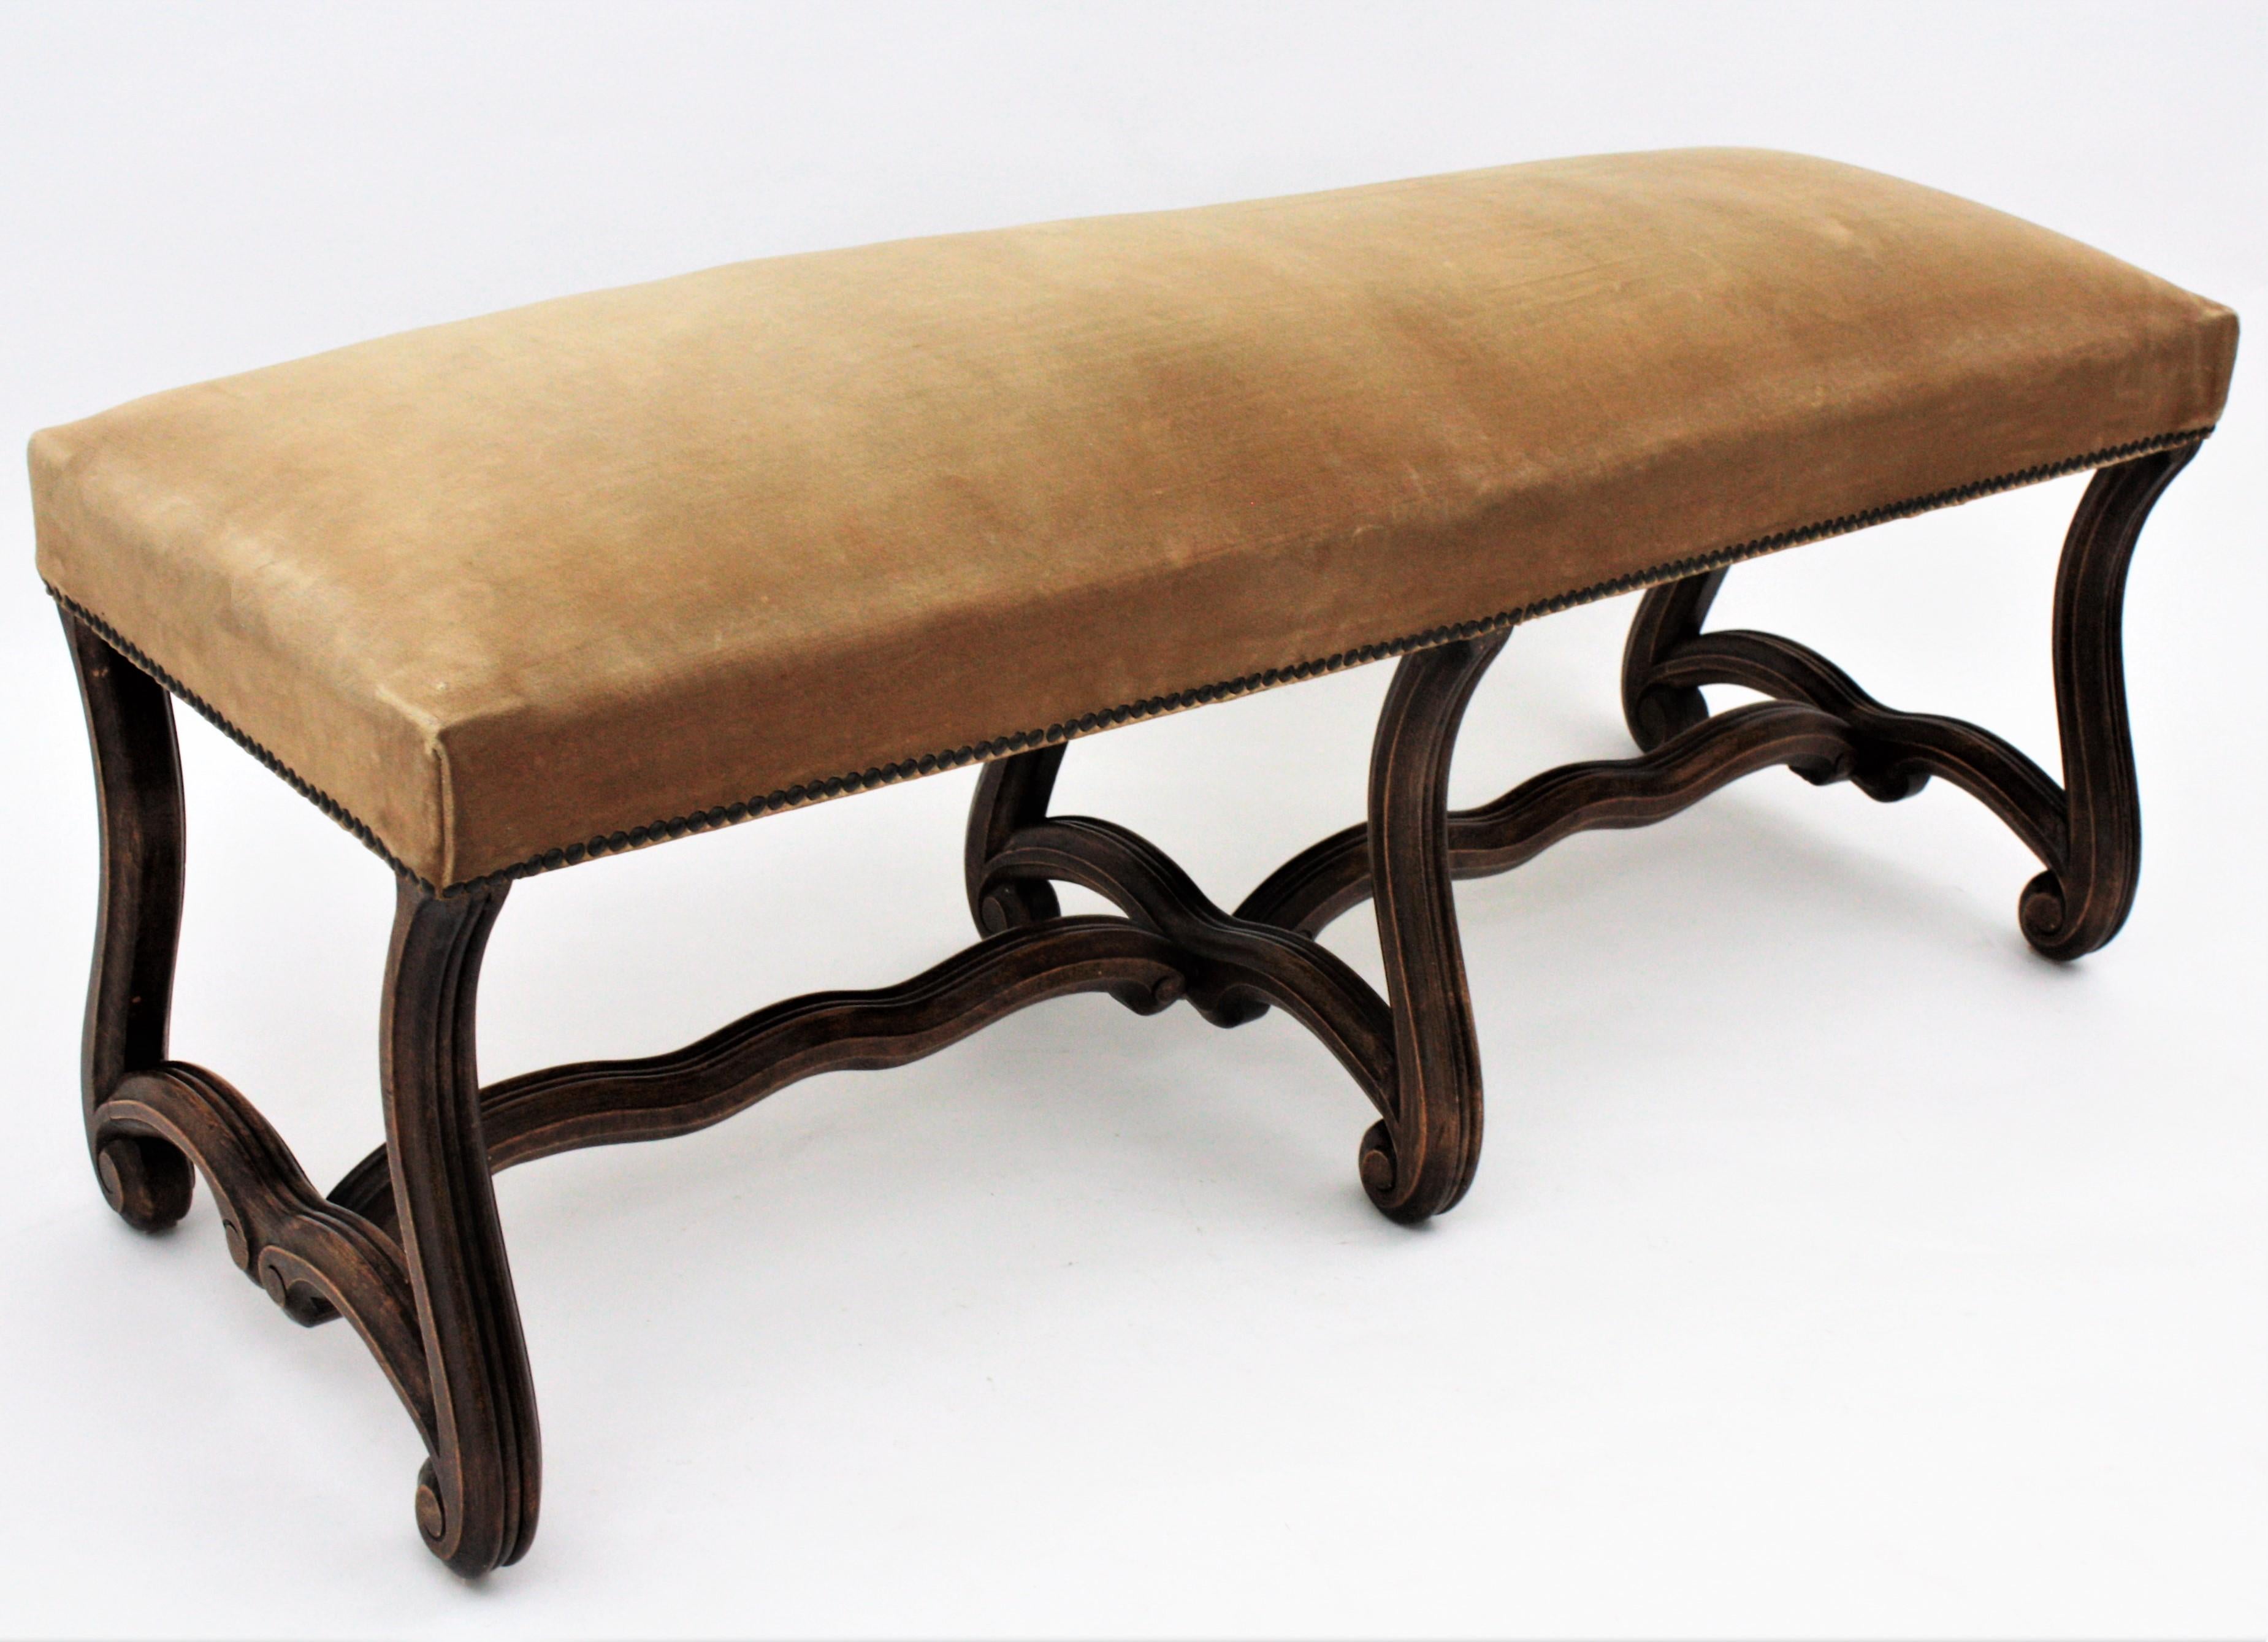 20th Century French 1930s Louis XIV Style Os de Mouton Legs Bench in Velvet Upholstery